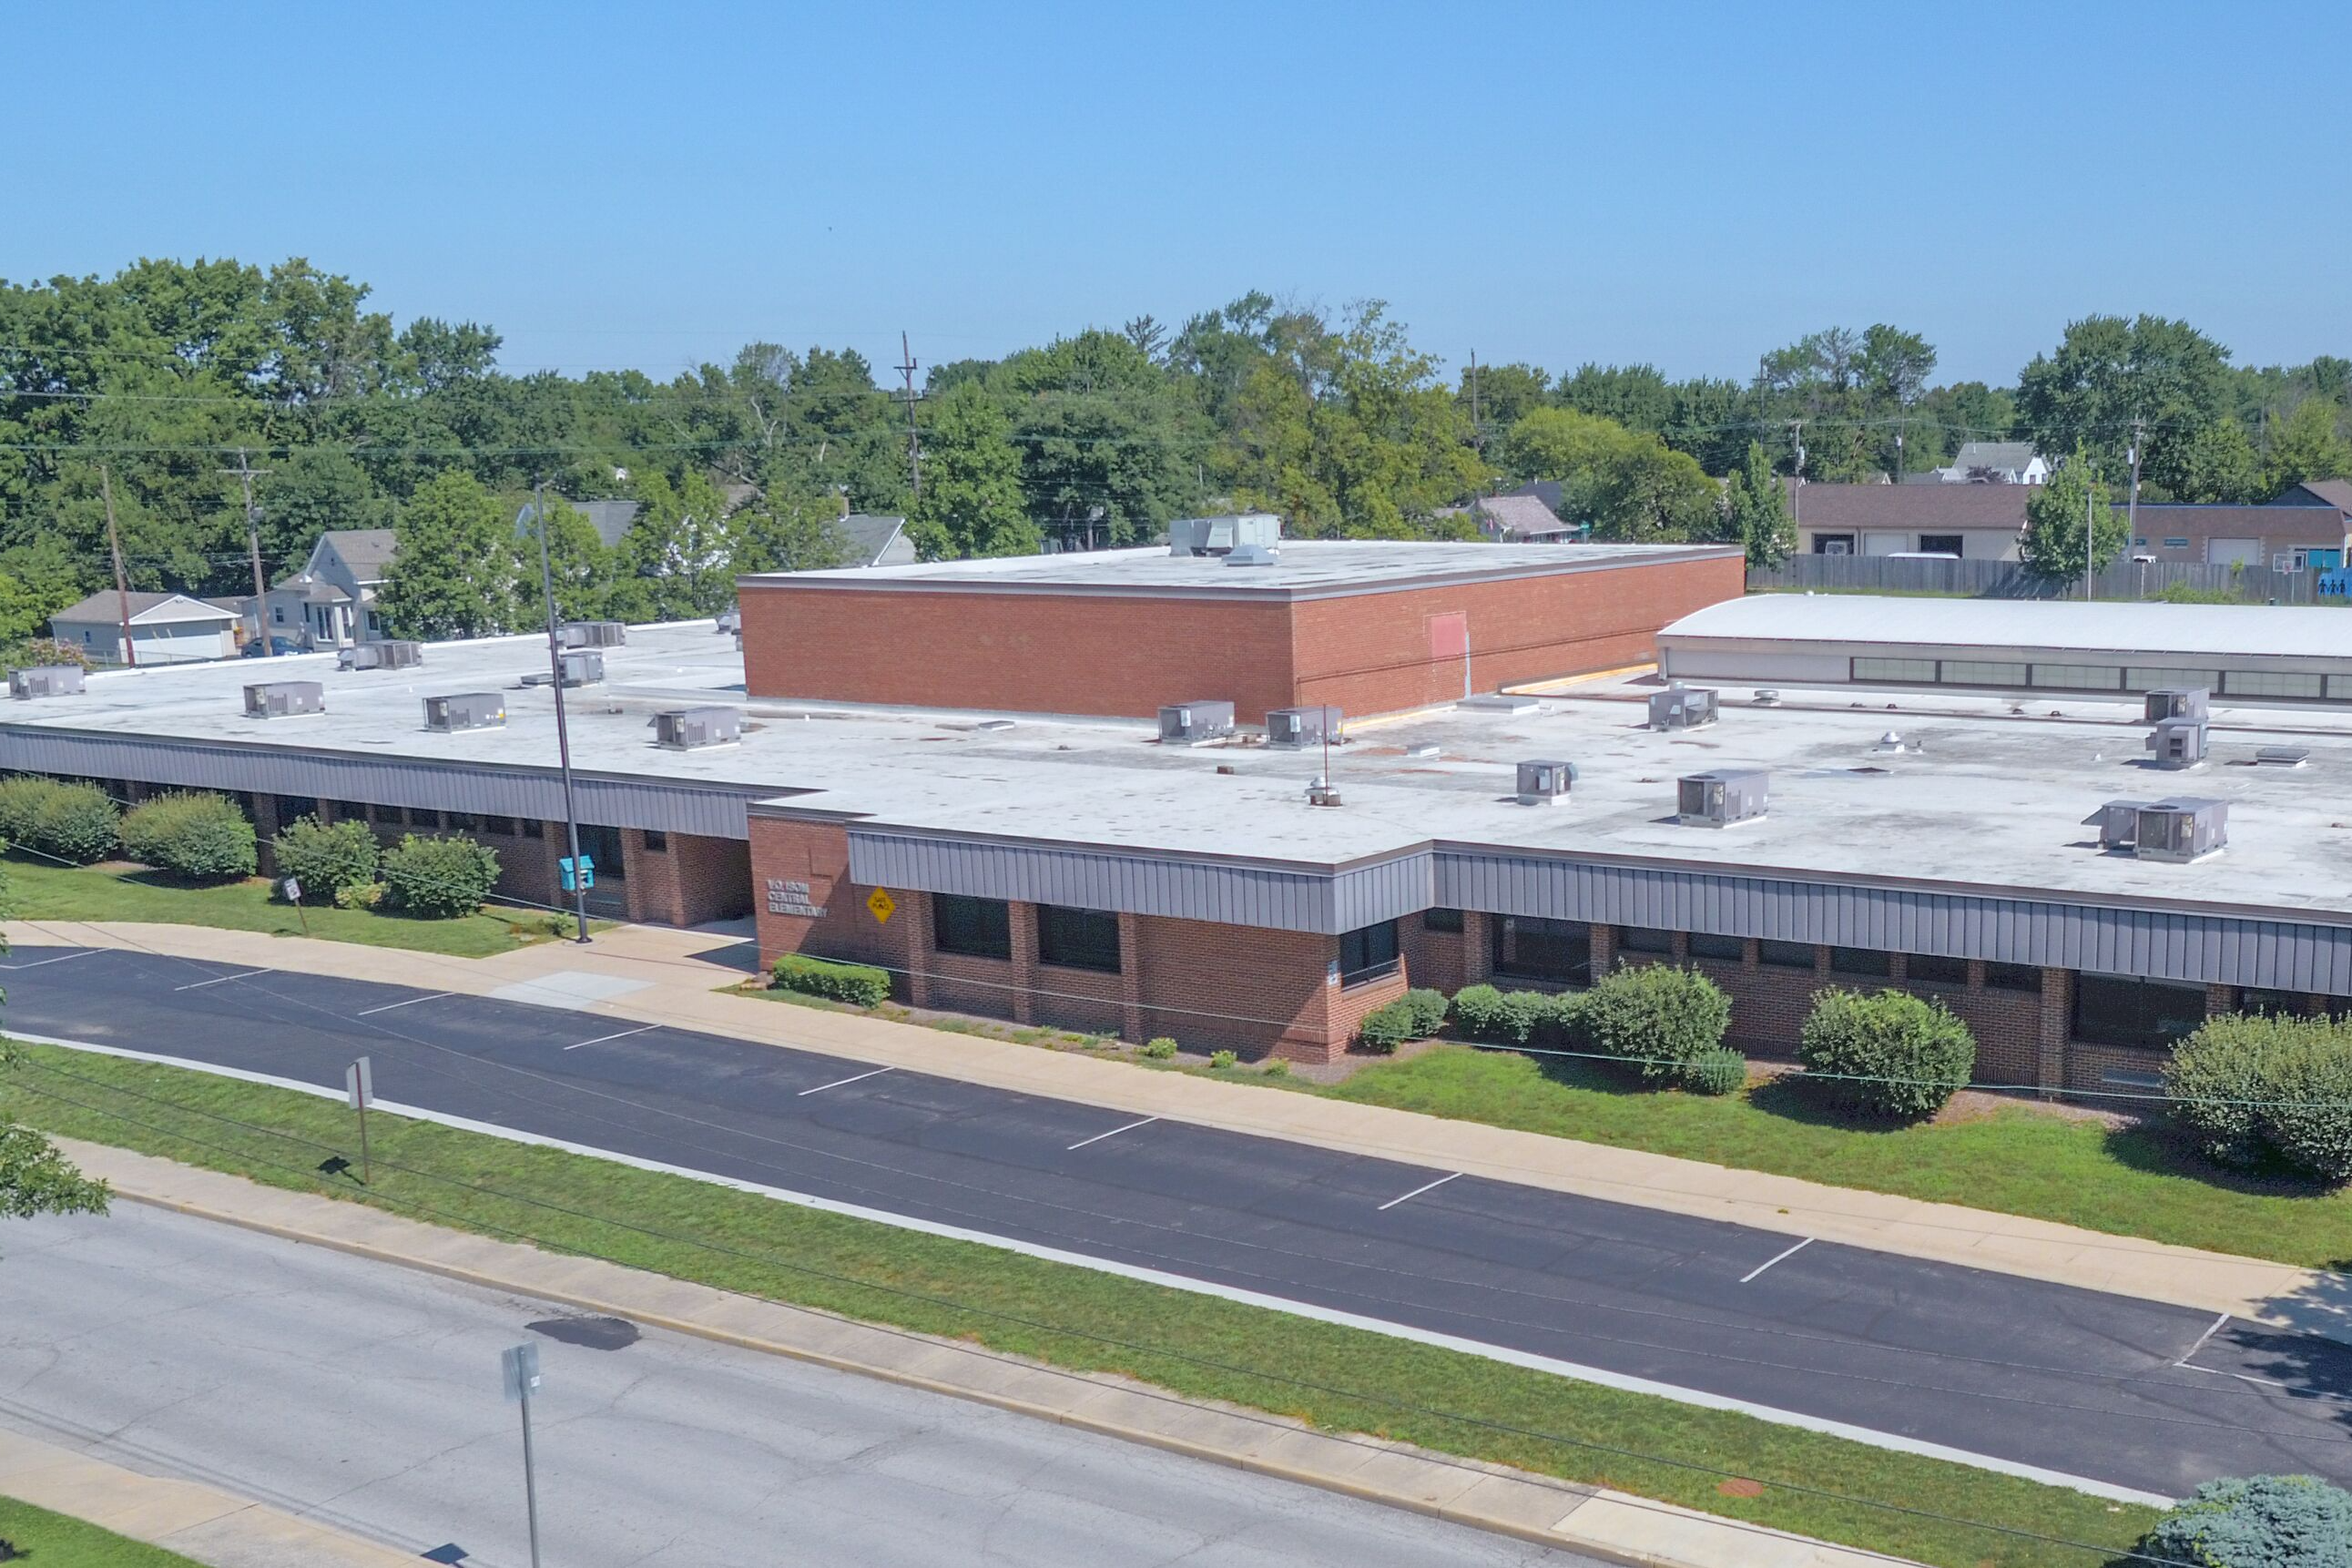 aerial view of Isom Elementary